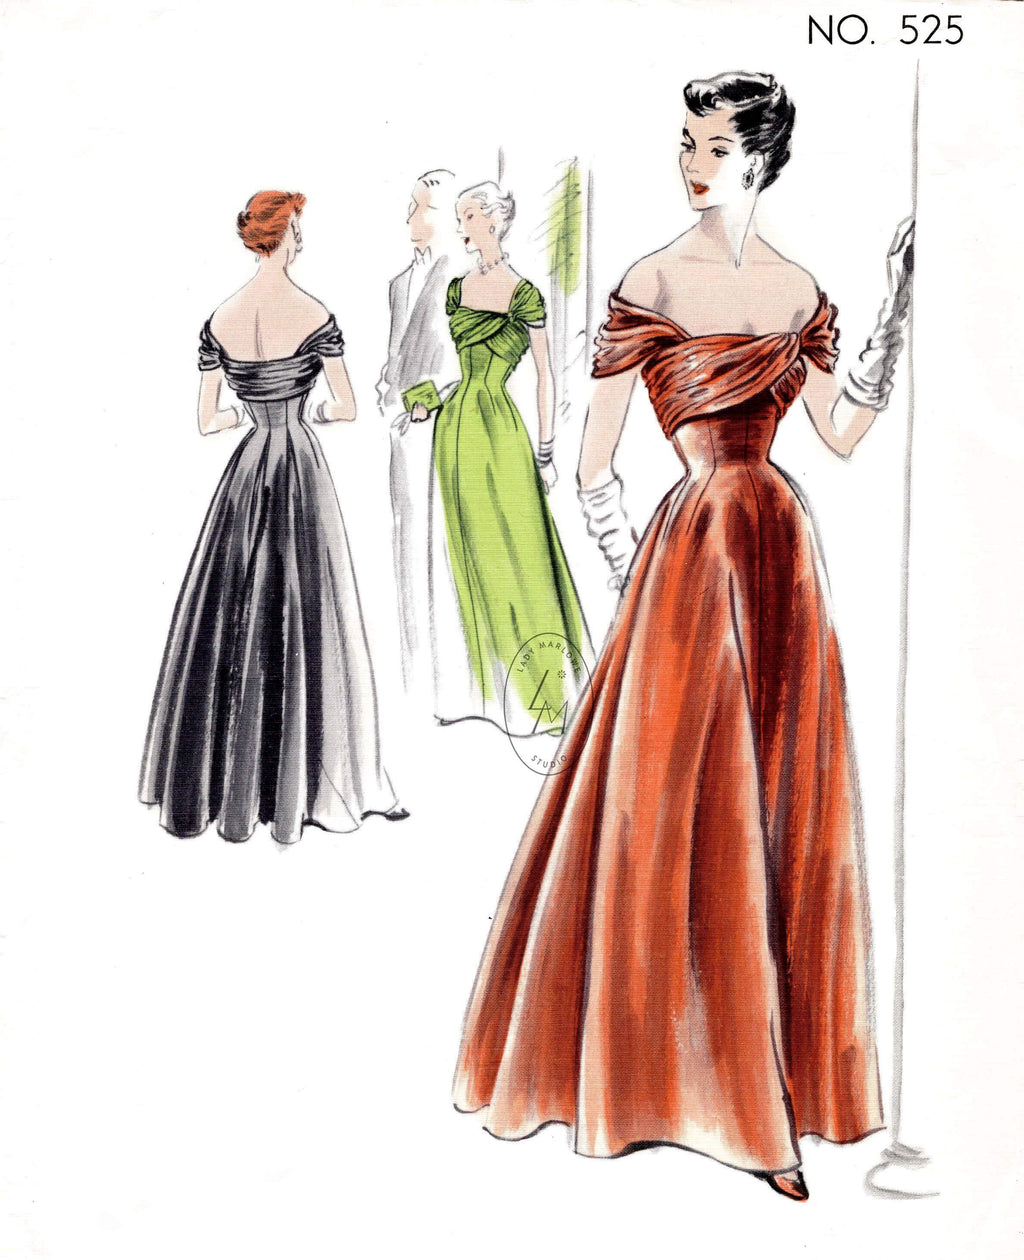 1940s 1950s evening dress ball gown Vogue Couturier 525 bardot neckline grecian drape full skirt vintage sewing pattern reproduction